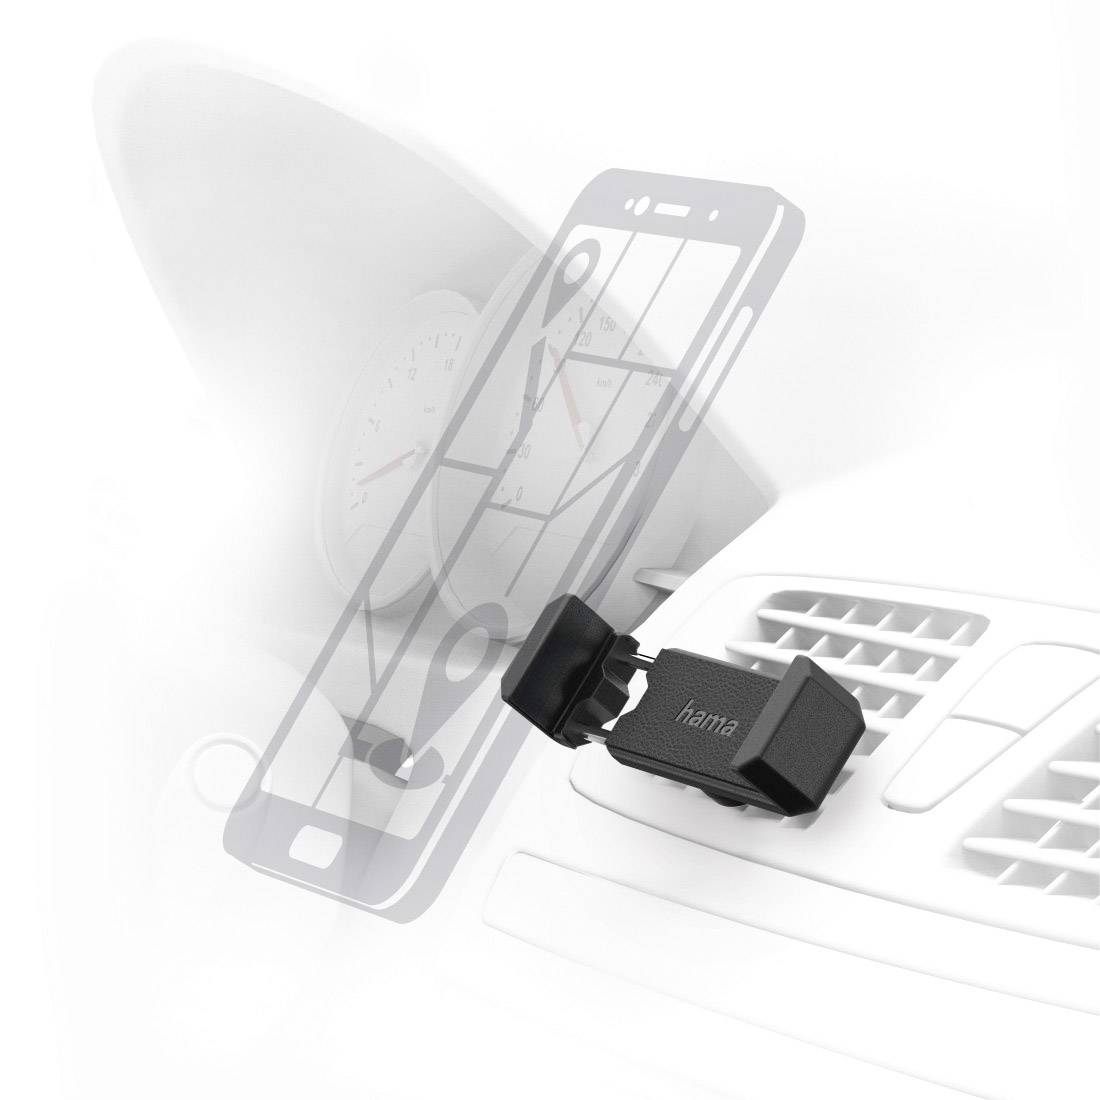 Universal smartphone holder, devices with a width of 5.5 - 8.5 cm